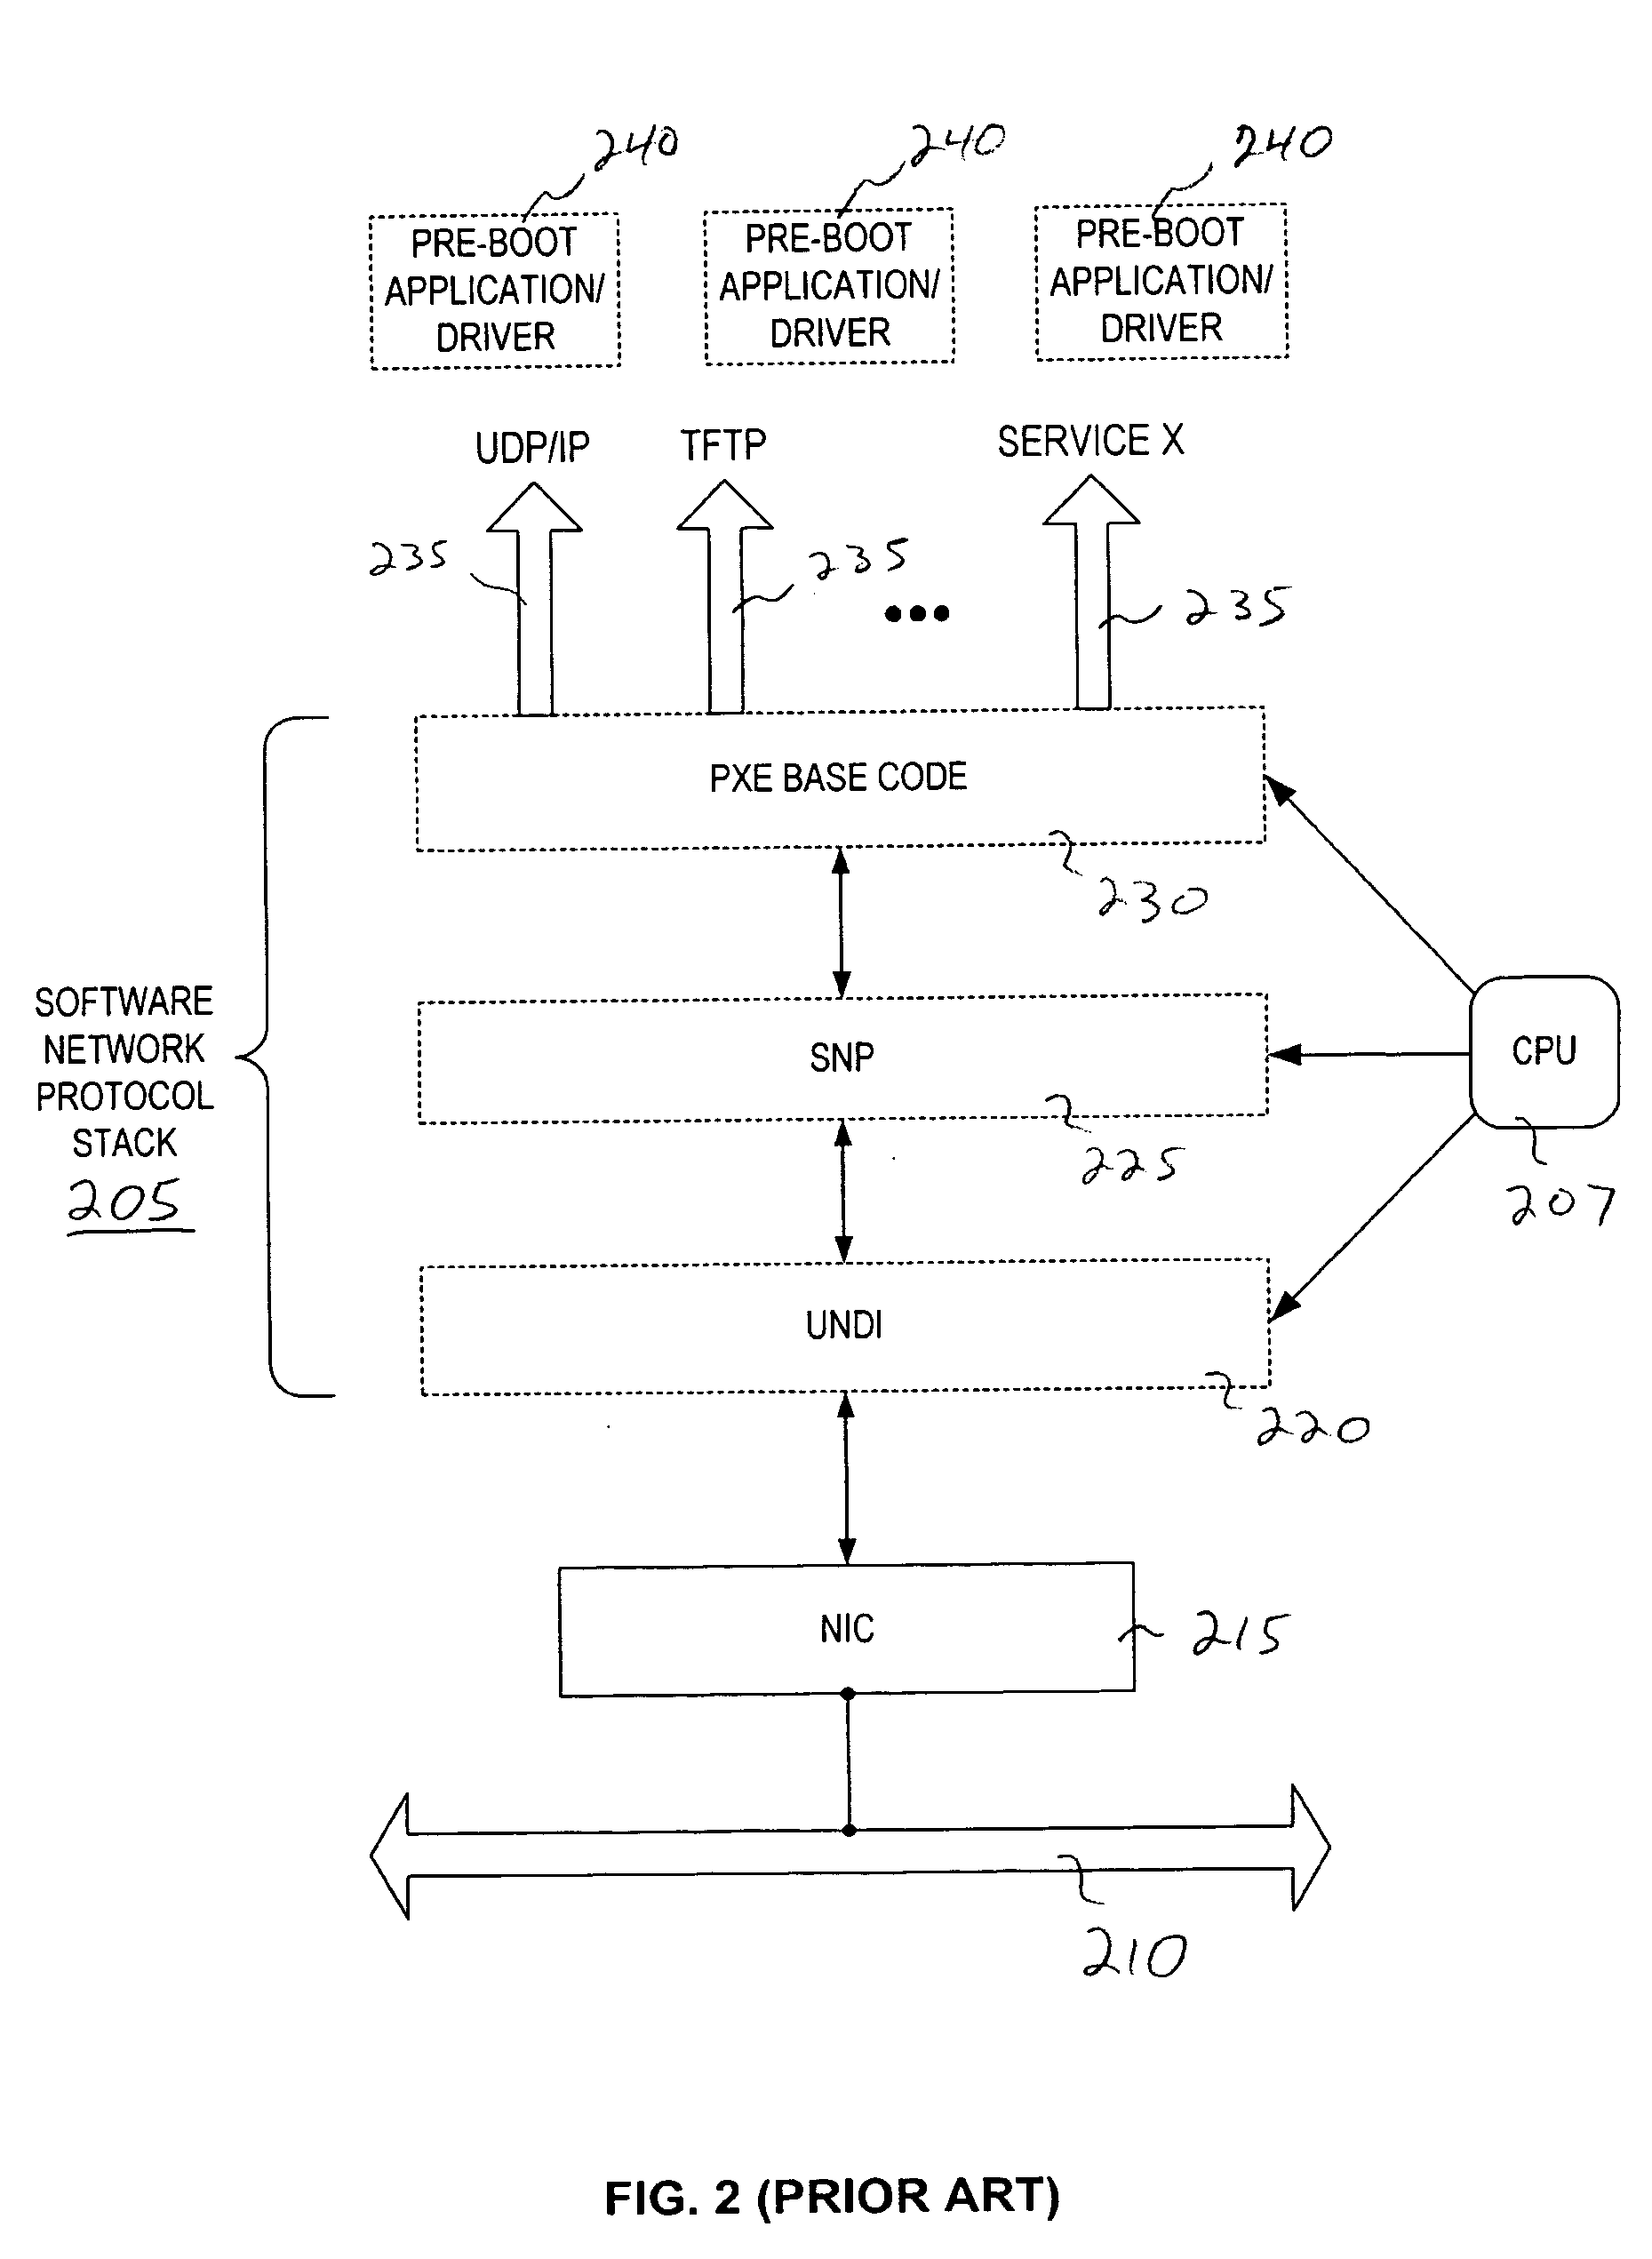 Firmware interfacing with network protocol offload engines to provide fast network booting, system repurposing, system provisioning, system manageability,and disaster recovery